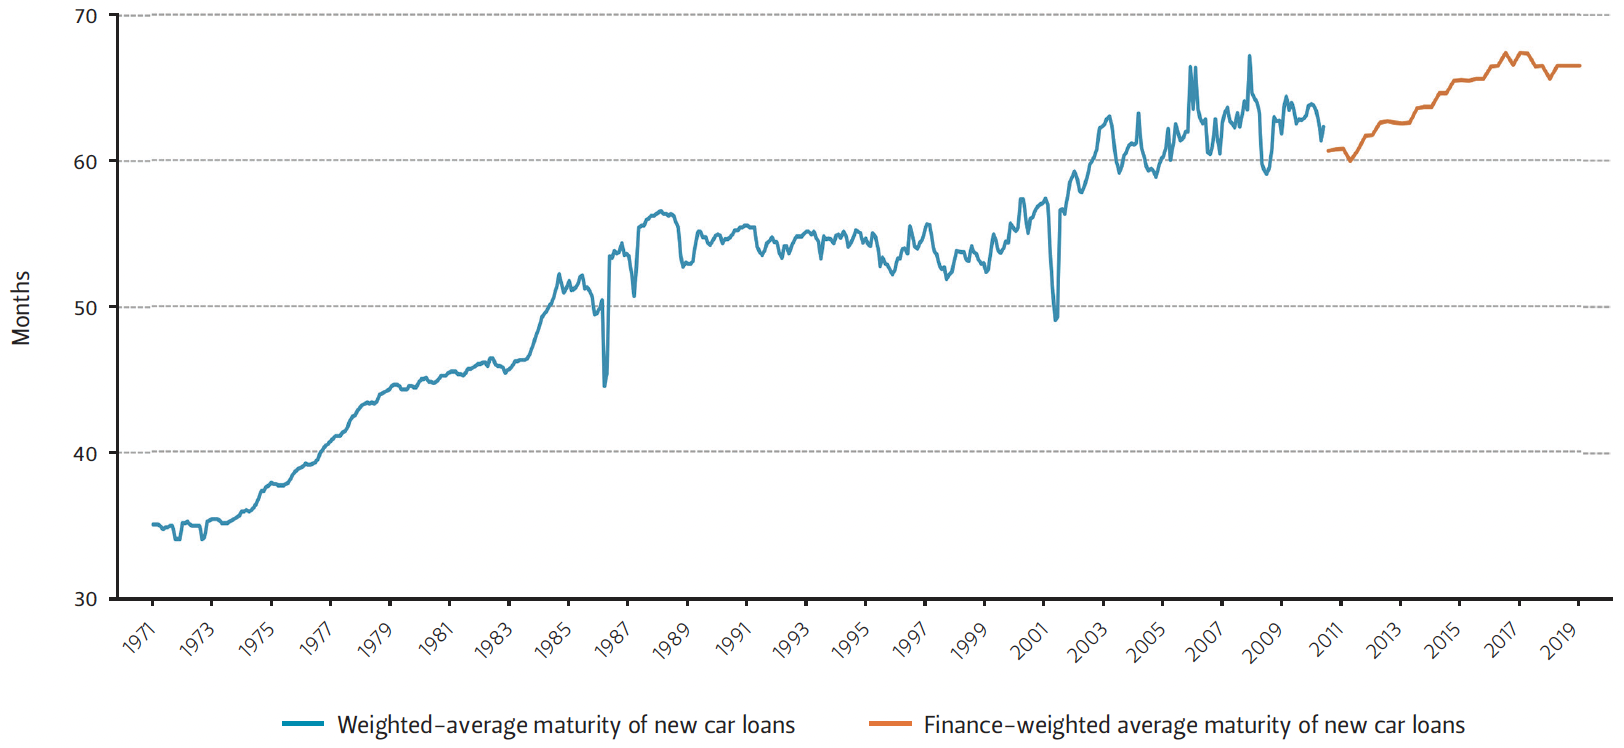 This graph shows that the average term length of auto loans in the U.S. has risen steadily for the past 20 years.